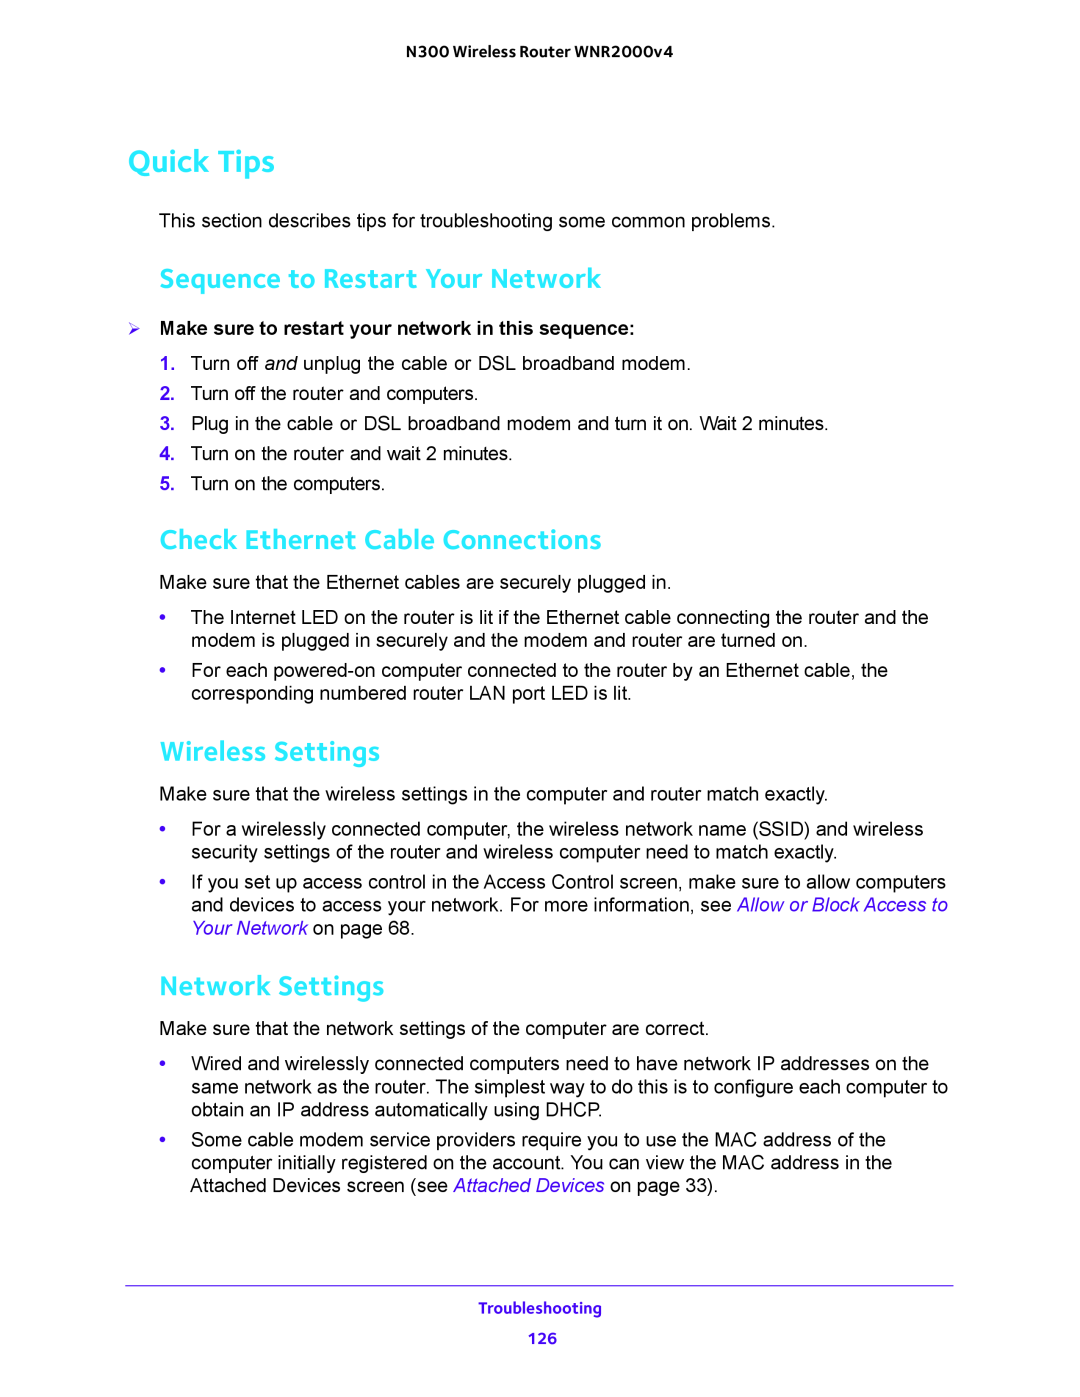 NETGEAR WNR200v4 Quick Tips, Sequence to Restart Your Network, Check Ethernet Cable Connections, Wireless Settings 